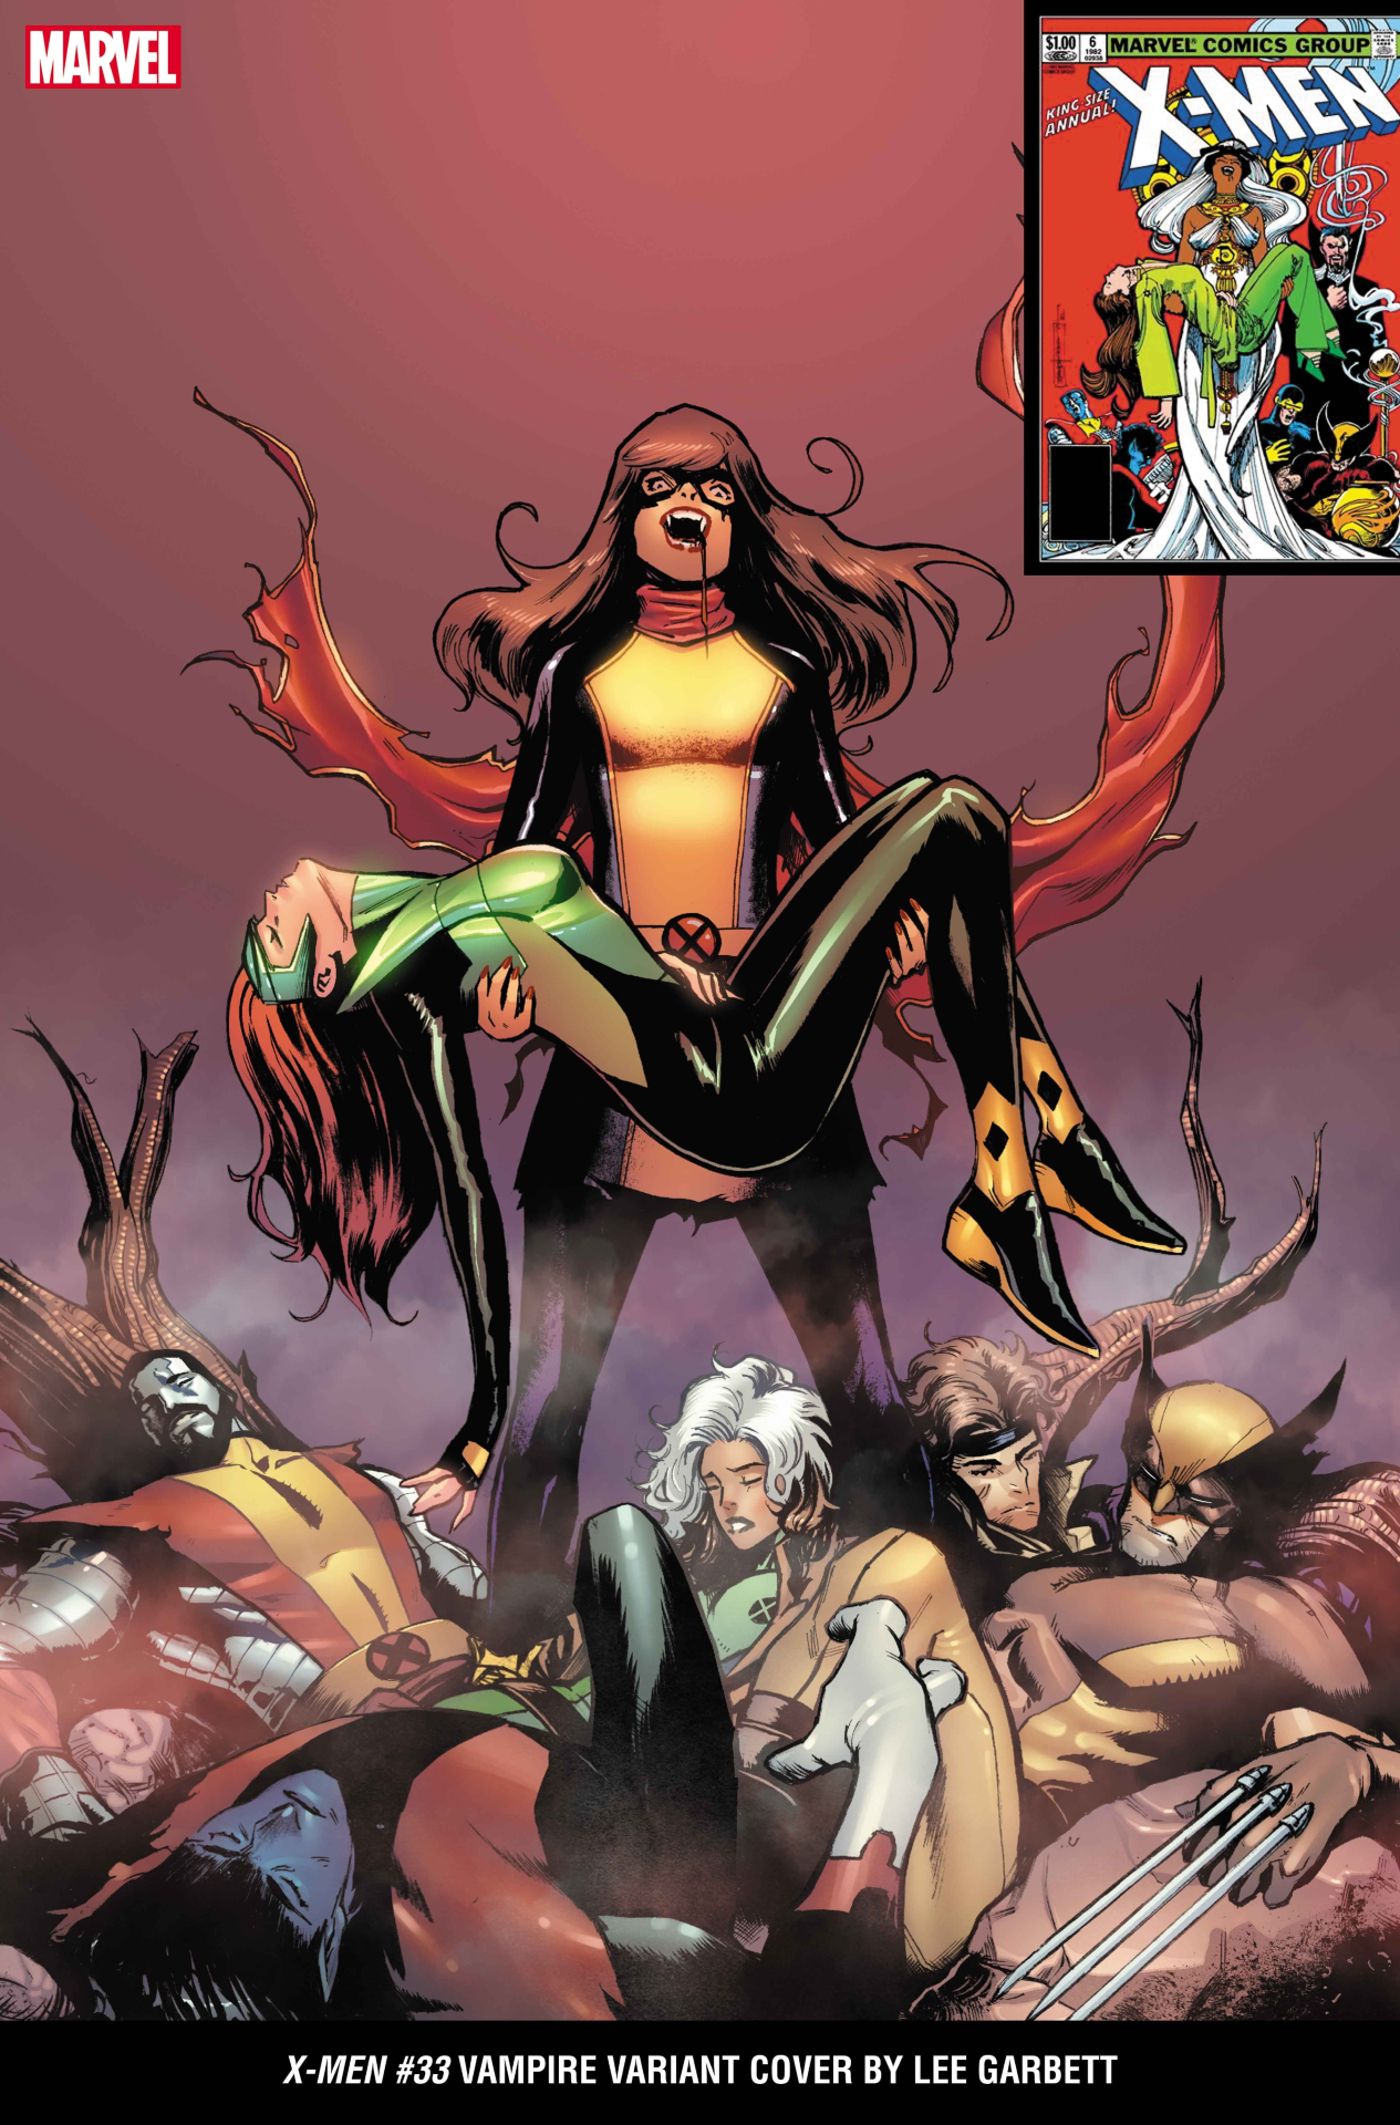 Ms. Marvel Slaughters Her New X-Men Family in Epic Vampire Transformation